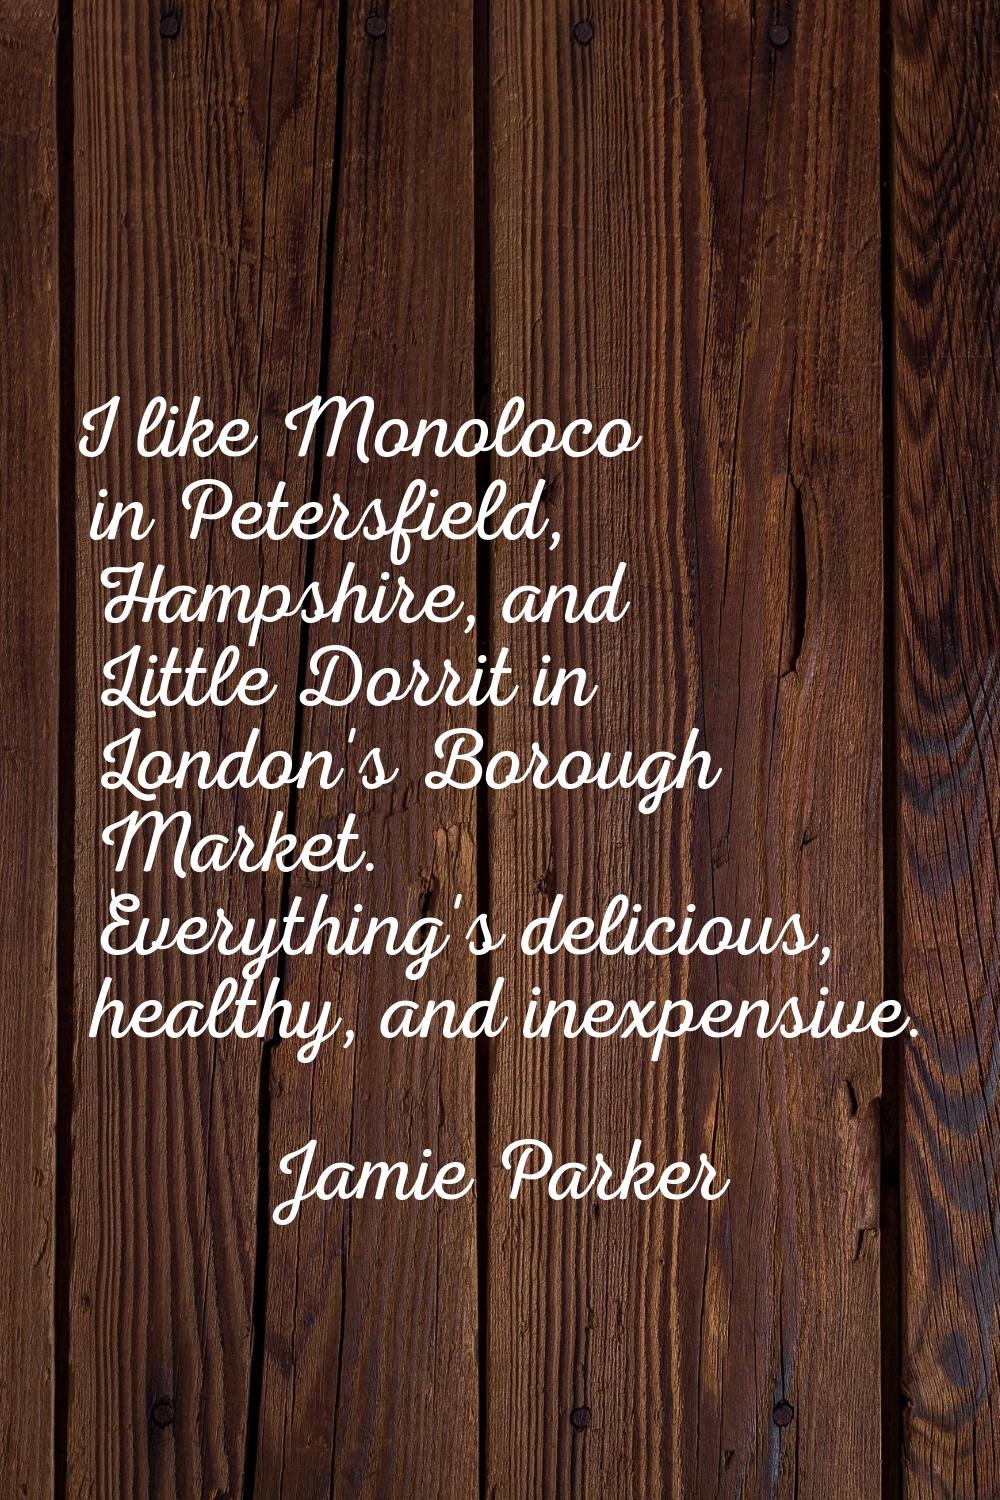 I like Monoloco in Petersfield, Hampshire, and Little Dorrit in London's Borough Market. Everything